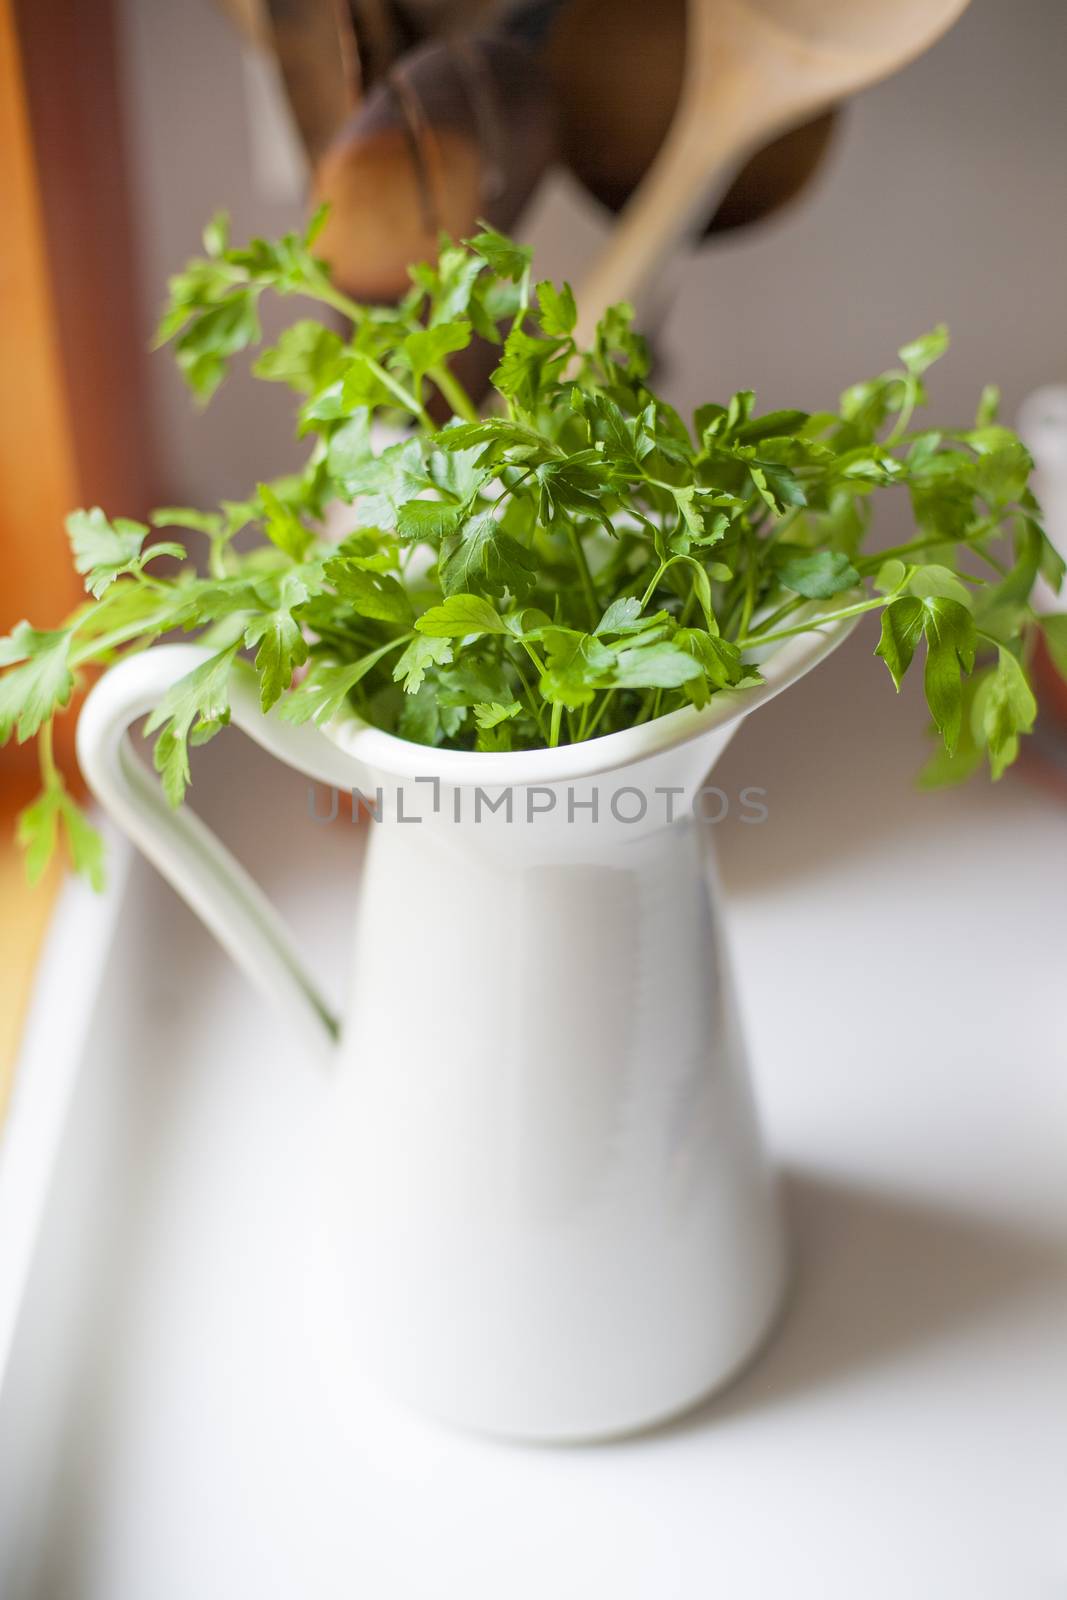 natural parsley twigs in traditional rustic white jug with handle in the kitchen